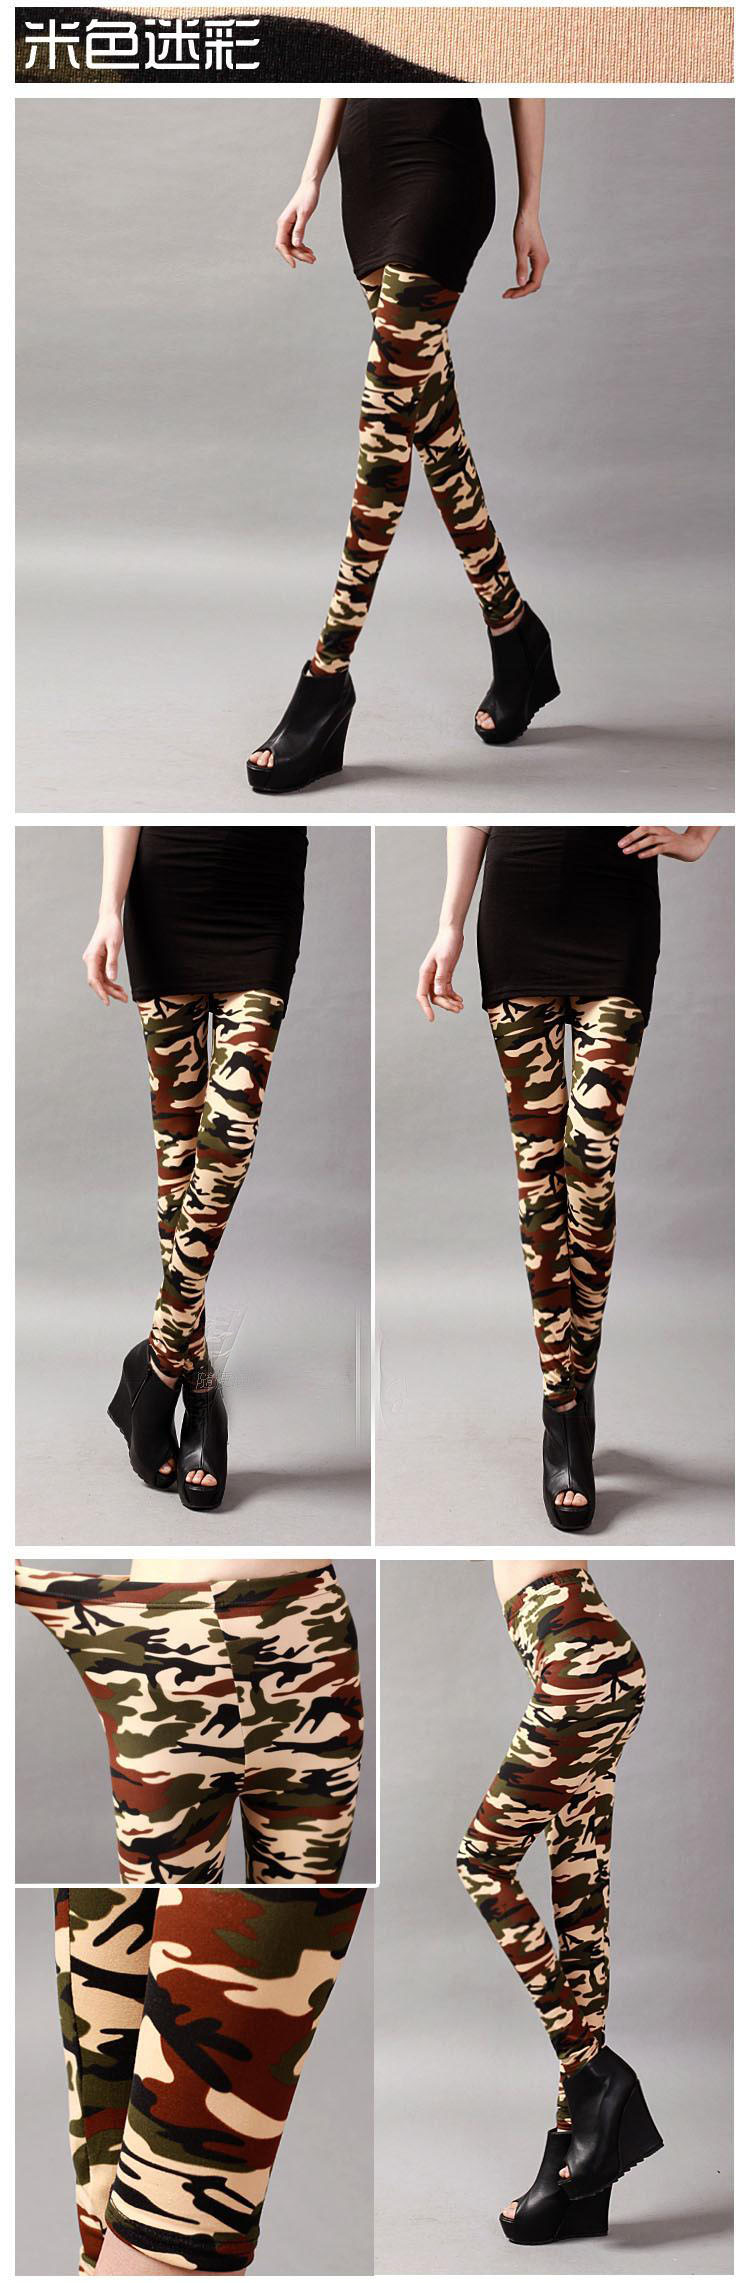 Army-green-camouflage-cotton-printed-leggings